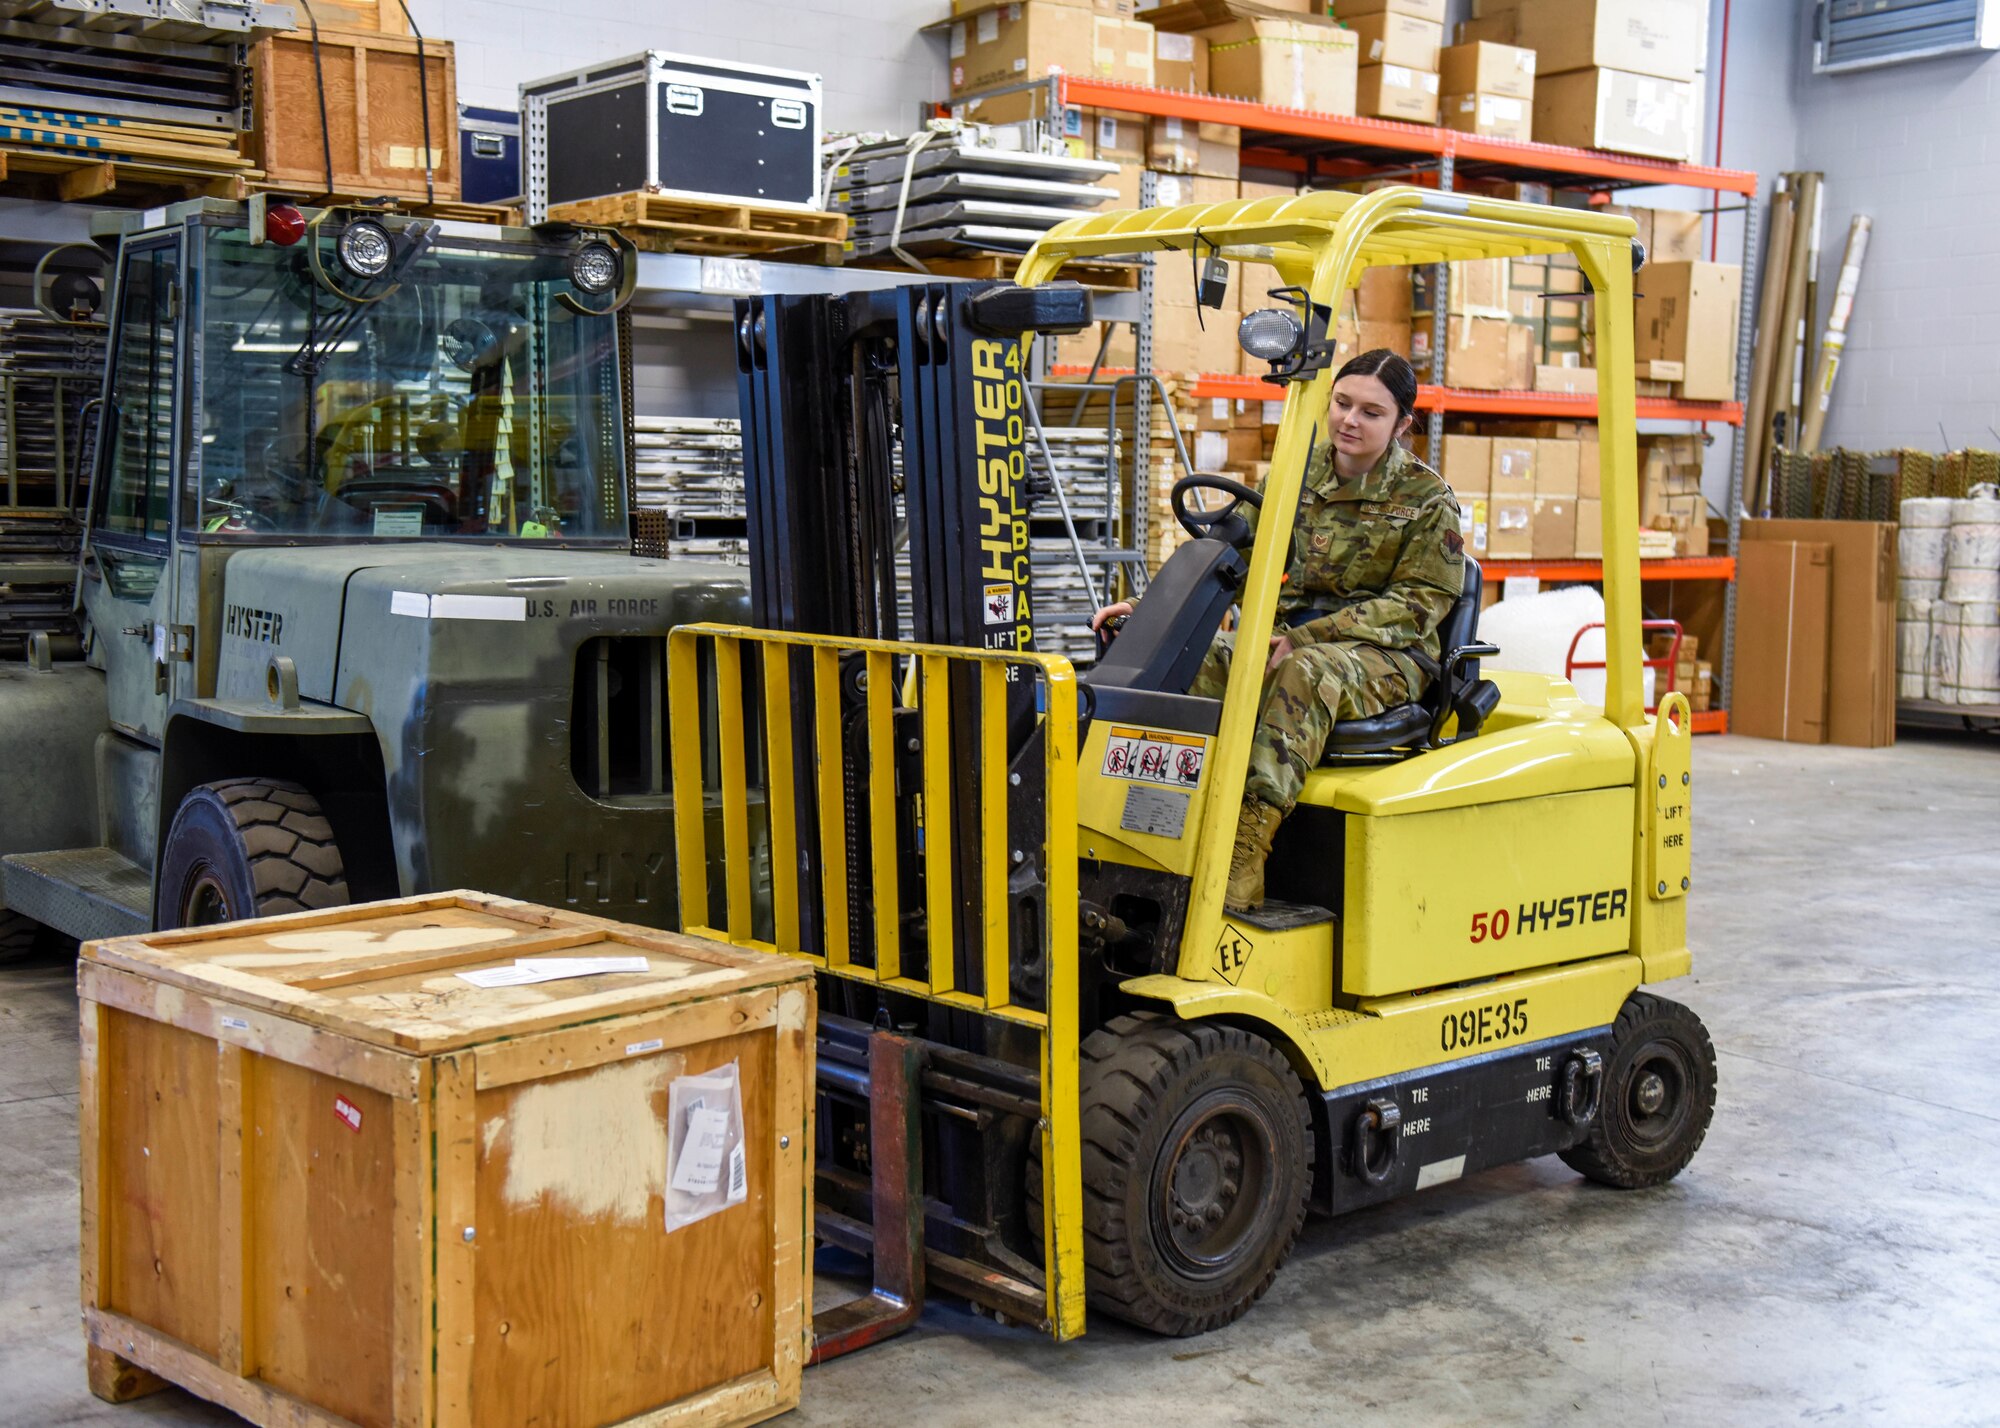 U.S. Air Force Staff Sgt. Raven Driftmyer, a traffic management specialist assigned to the Ohio Air National Guard’s 180th Fighter Wing, uses a forklift to move a crate in the receiving warehouse at the Toledo Air National Guard Base, Ohio, Jan. 12, 2020. The Traffic Management Office is responsible for processing and managing moving cargo, shipments and Airmen around the world, as well as receiving supplies for the base, ensuring the Air Force can fulfill its mission anywhere in the world. (U.S. Air National Guard Photo by Senior Airman Kregg York)